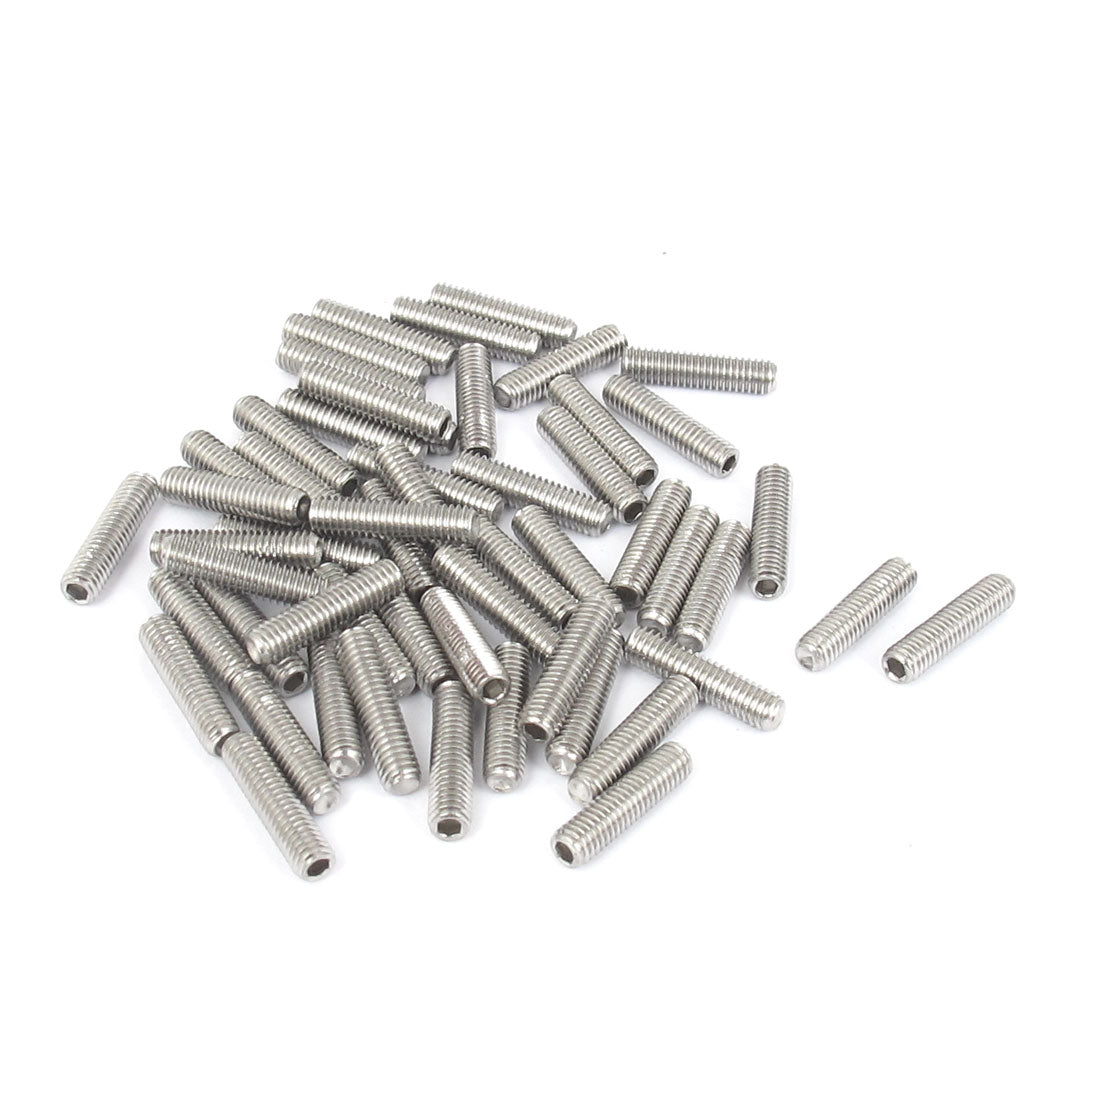 uxcell Uxcell M3x12mm Stainless Steel Hex Socket Set Cap Point Grub Screws Silver Tone 50pcs